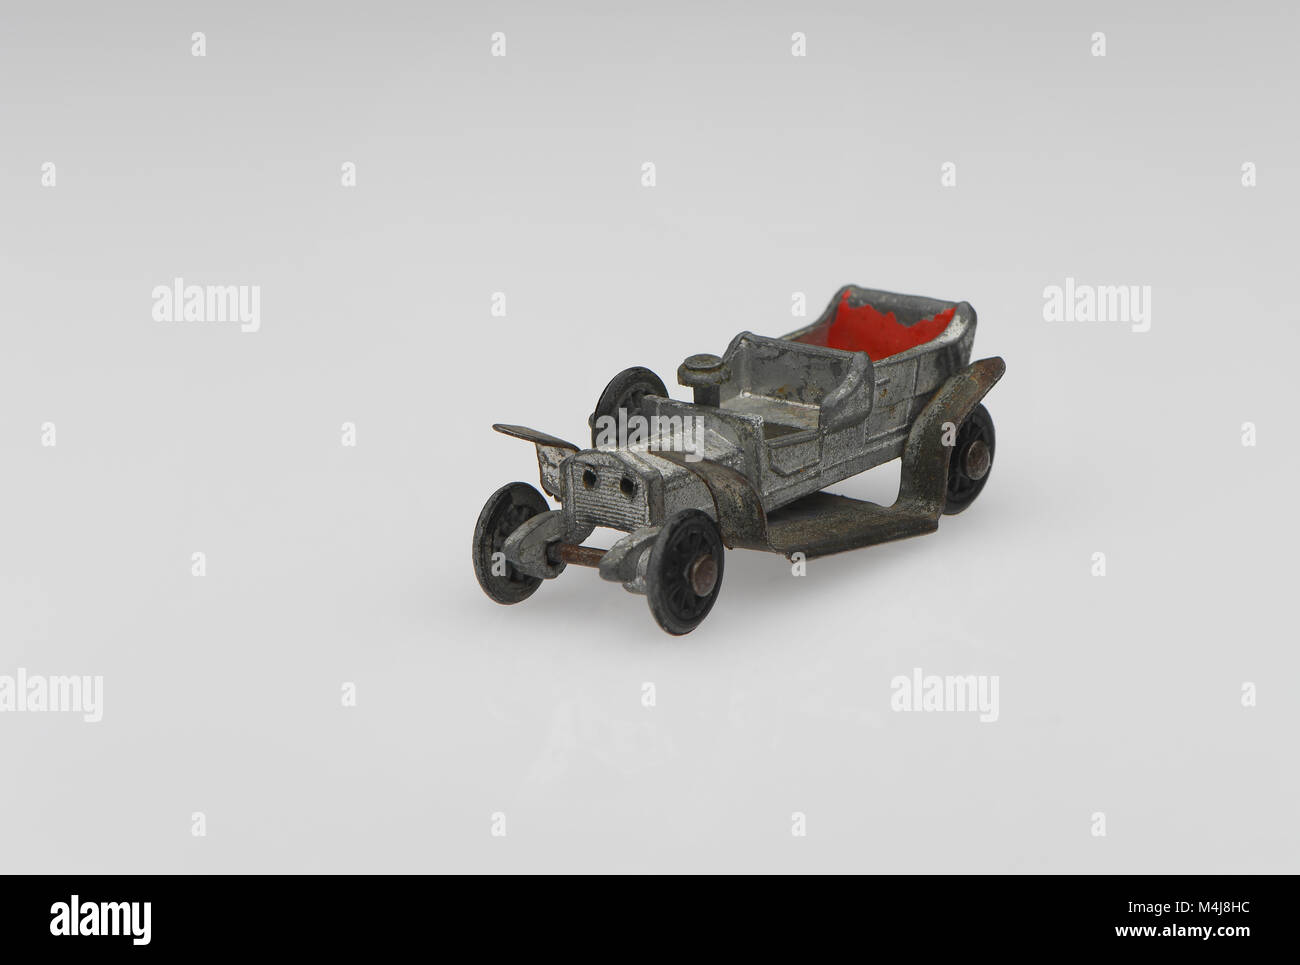 A vintage Rolls Royce Silver Ghost toy car from 1950s-60s in a well used played with condition on a white background. Stock Photo